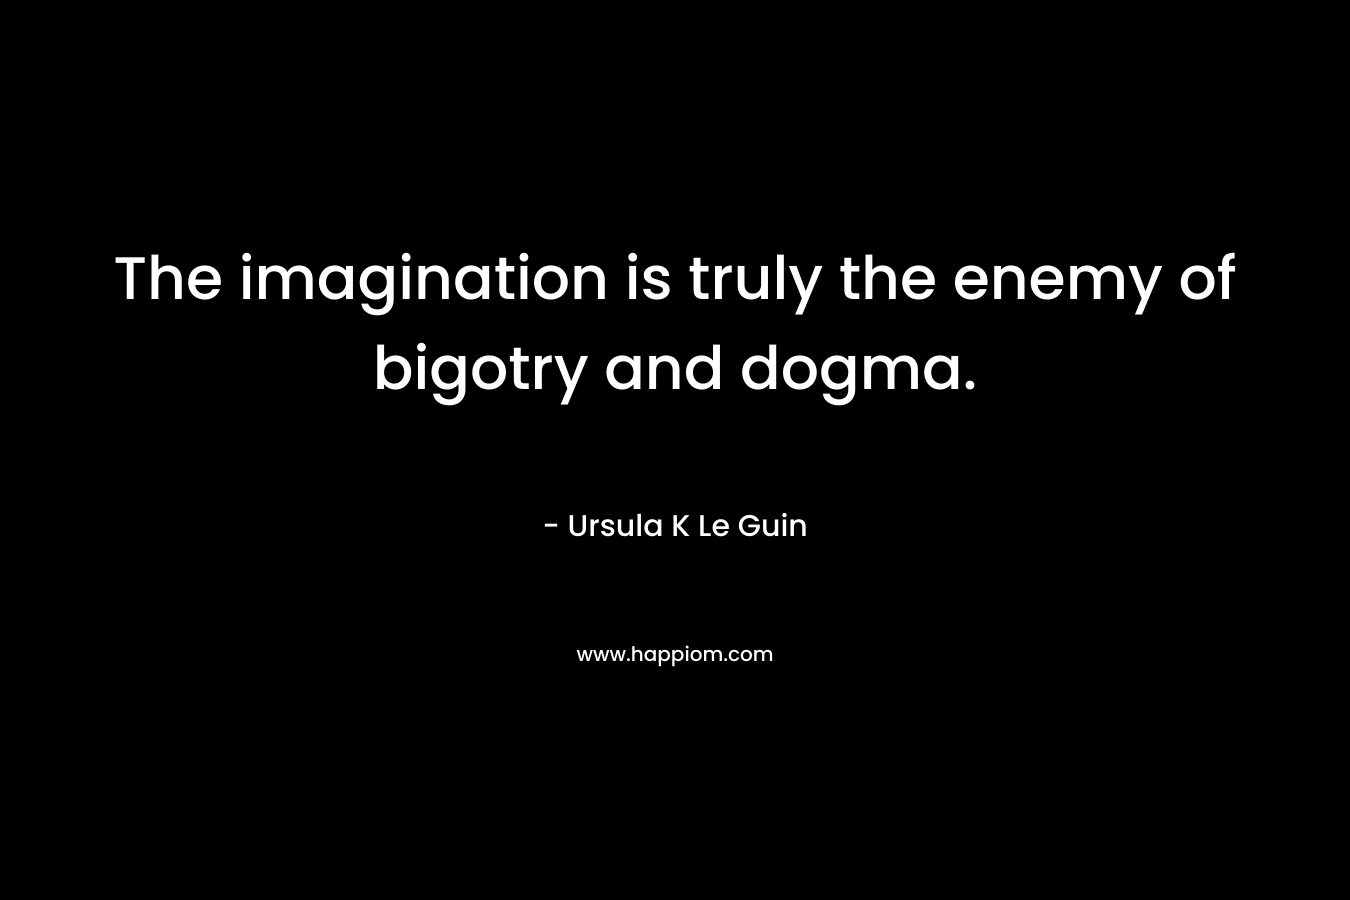 The imagination is truly the enemy of bigotry and dogma. – Ursula K Le Guin